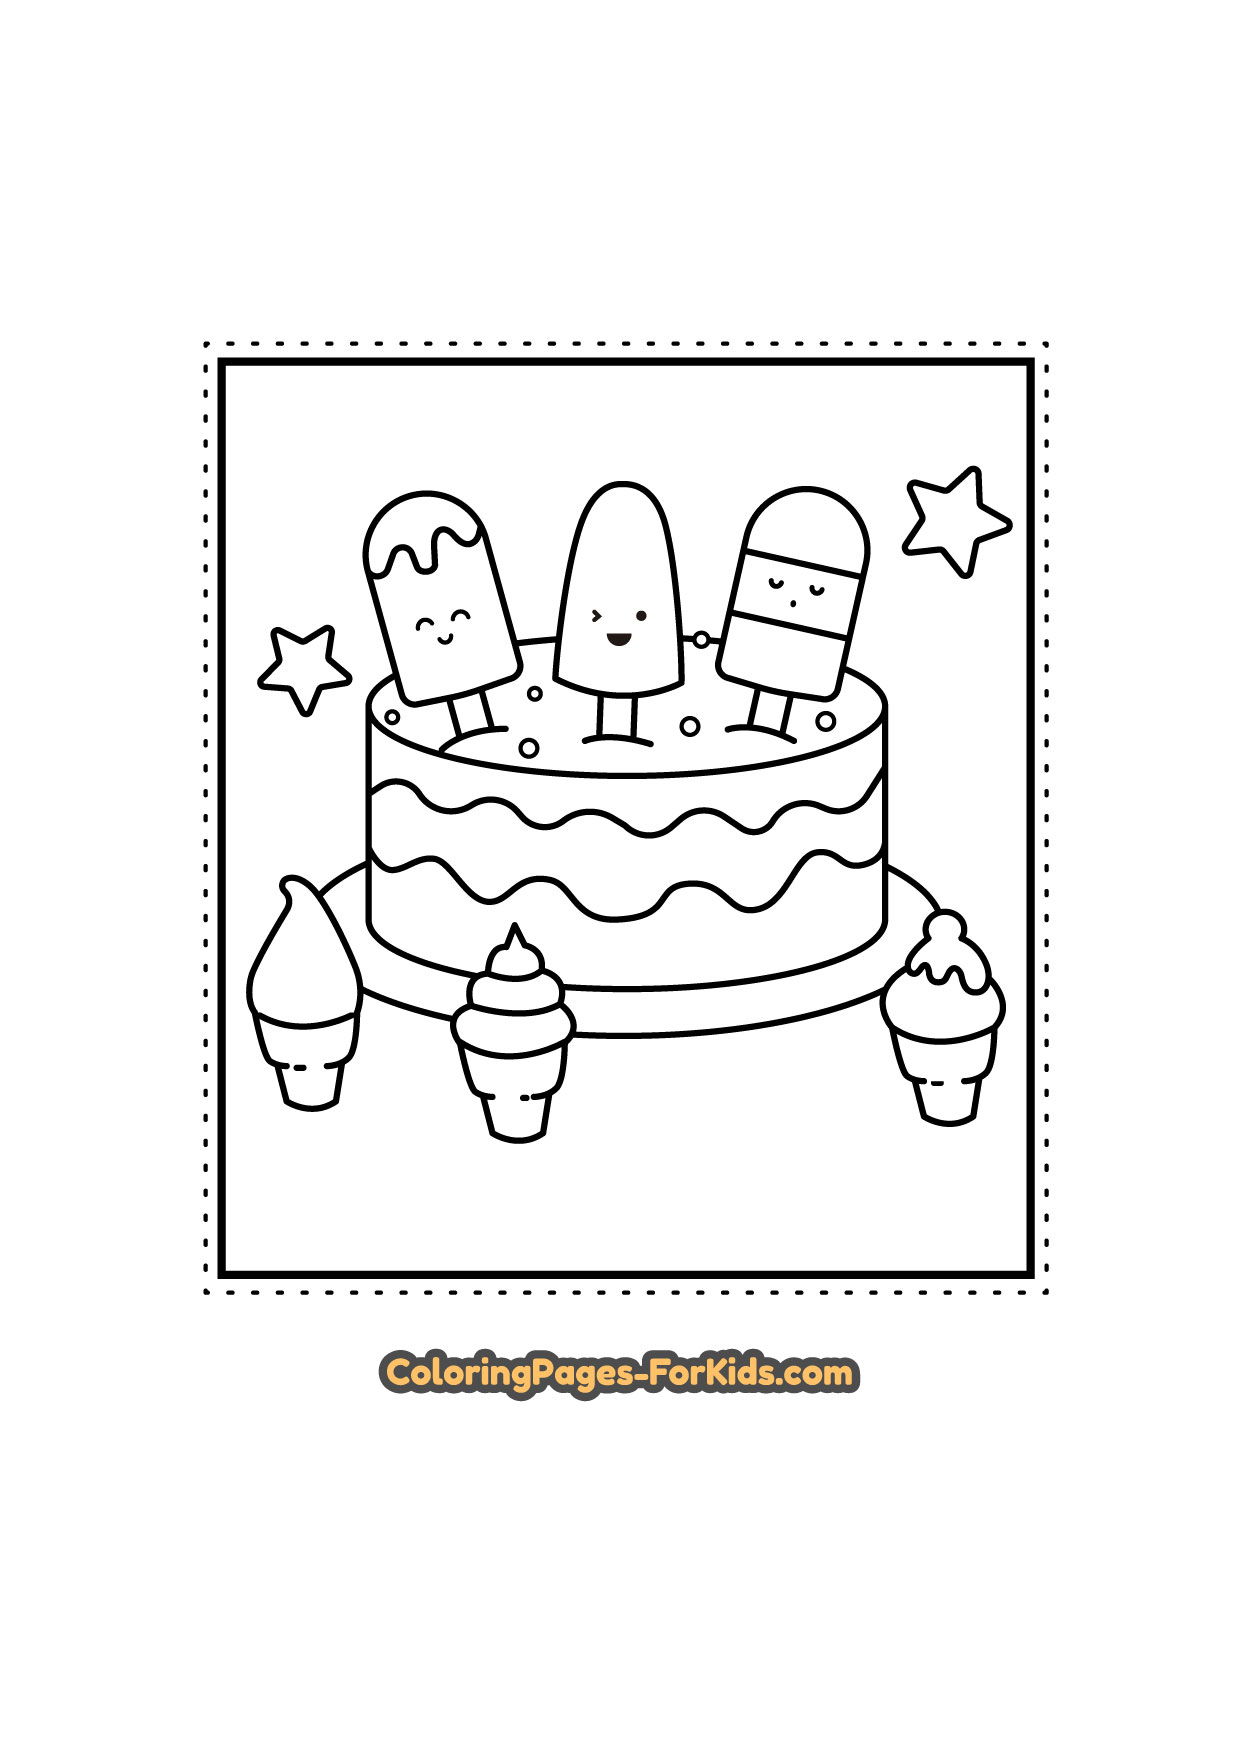 Free Coloring Pages for Kids: Candies